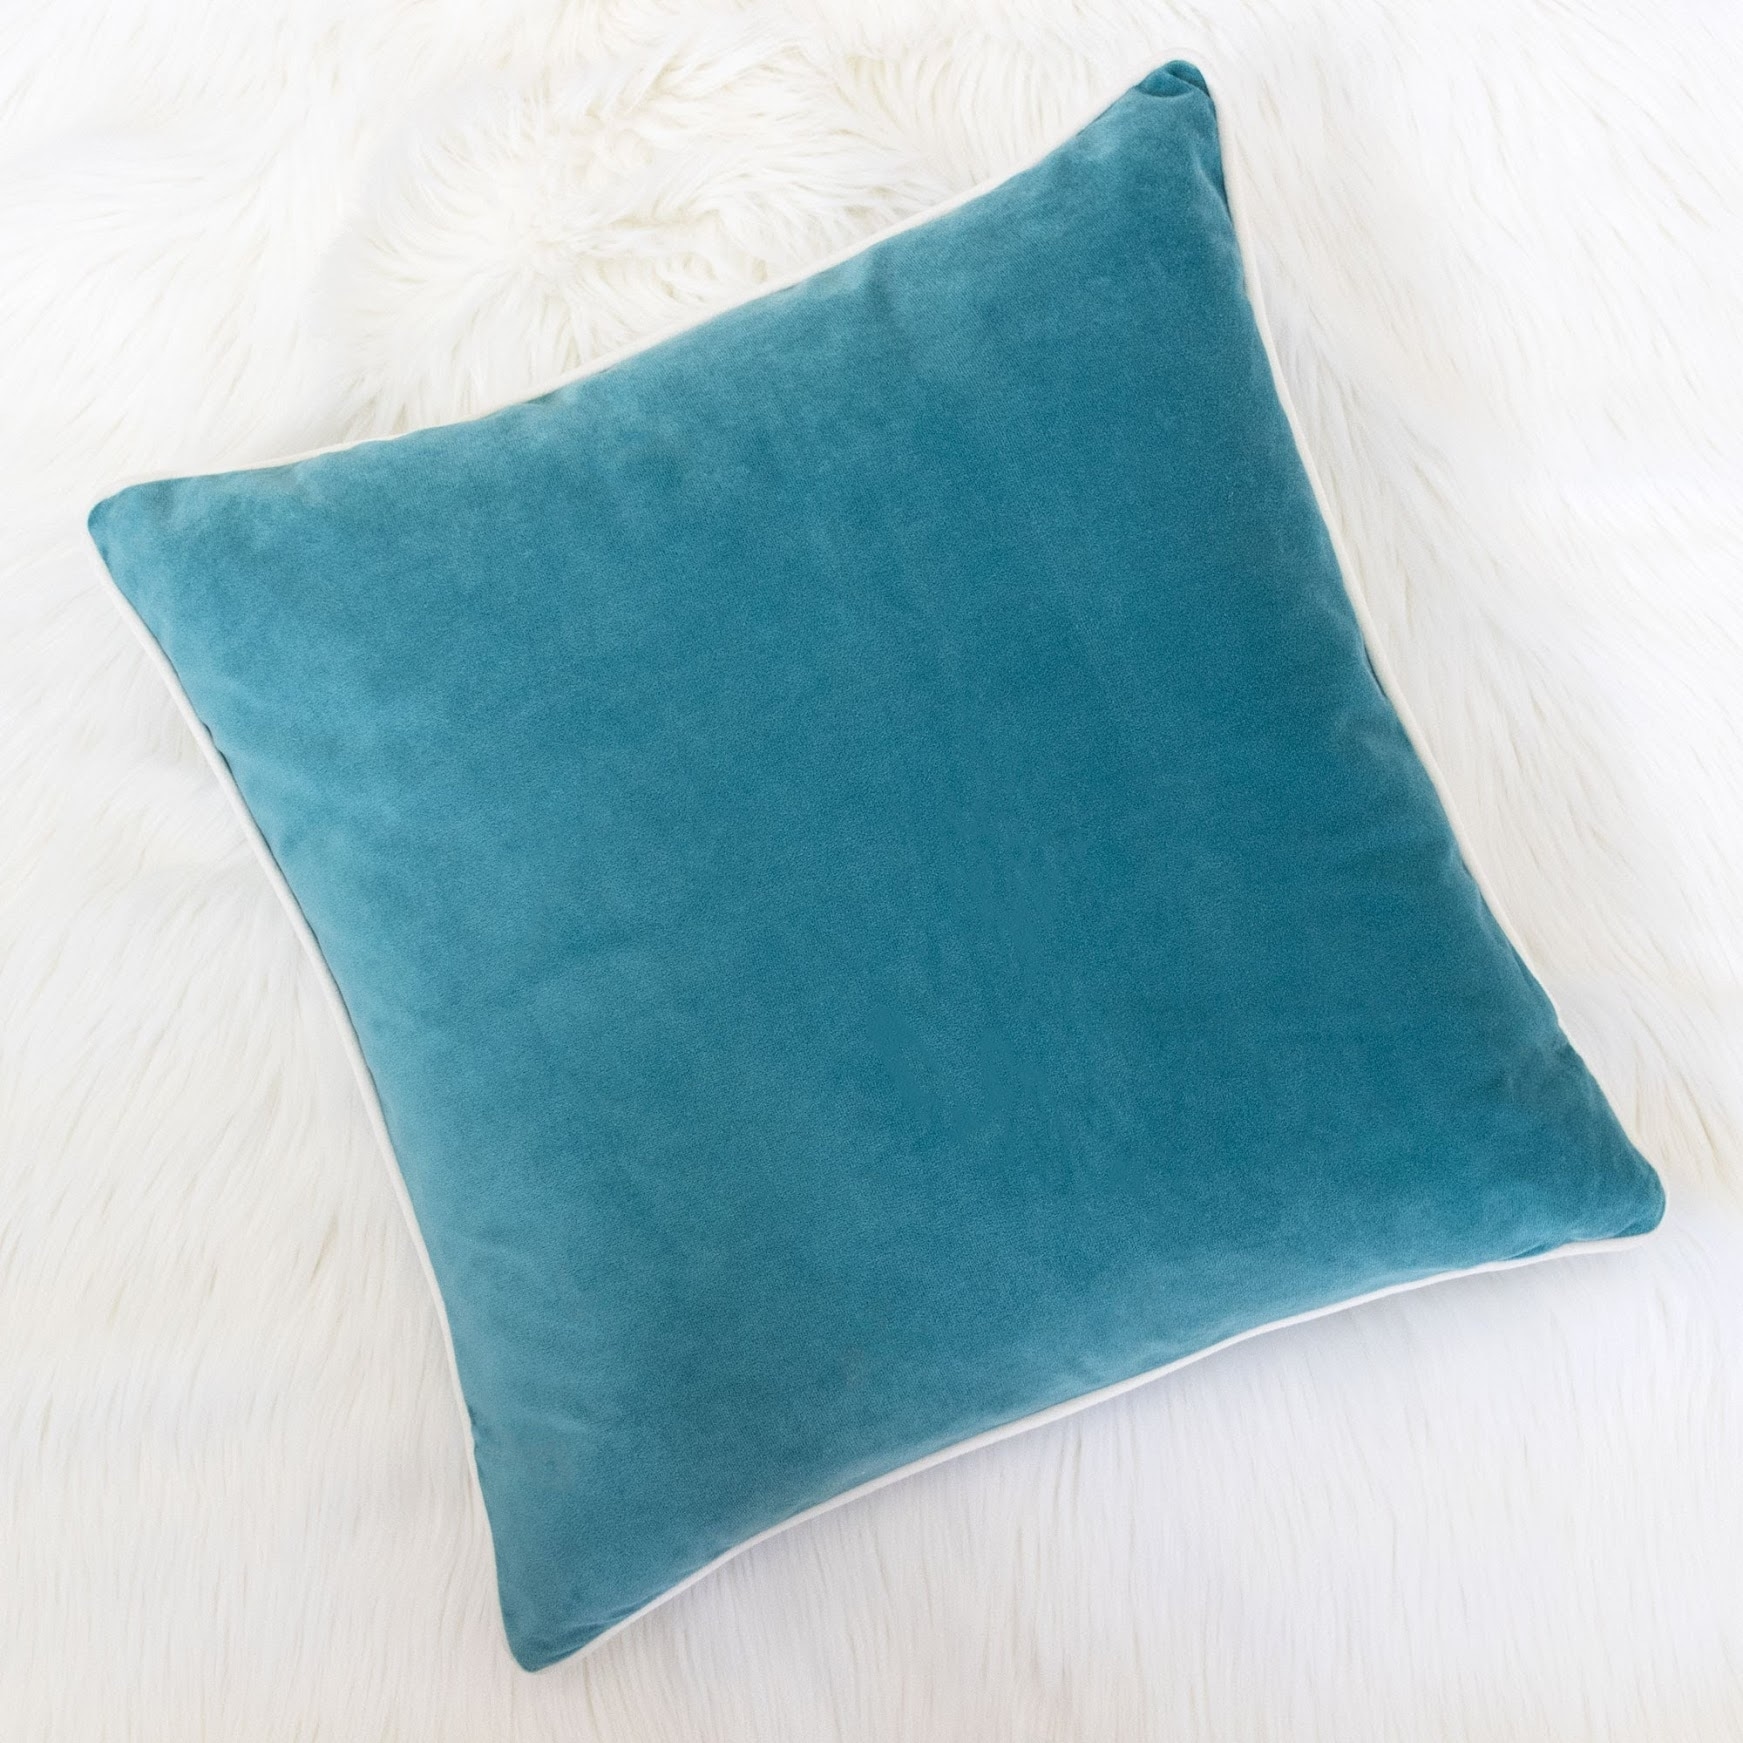 https://ak1.ostkcdn.com/images/products/is/images/direct/25319b324912db585575c11a2cc6f87e37871d1d/Homey-Cozy-Classical-Velvet-Solid-Throw-Pillow-Cover-%26-Insert.jpg